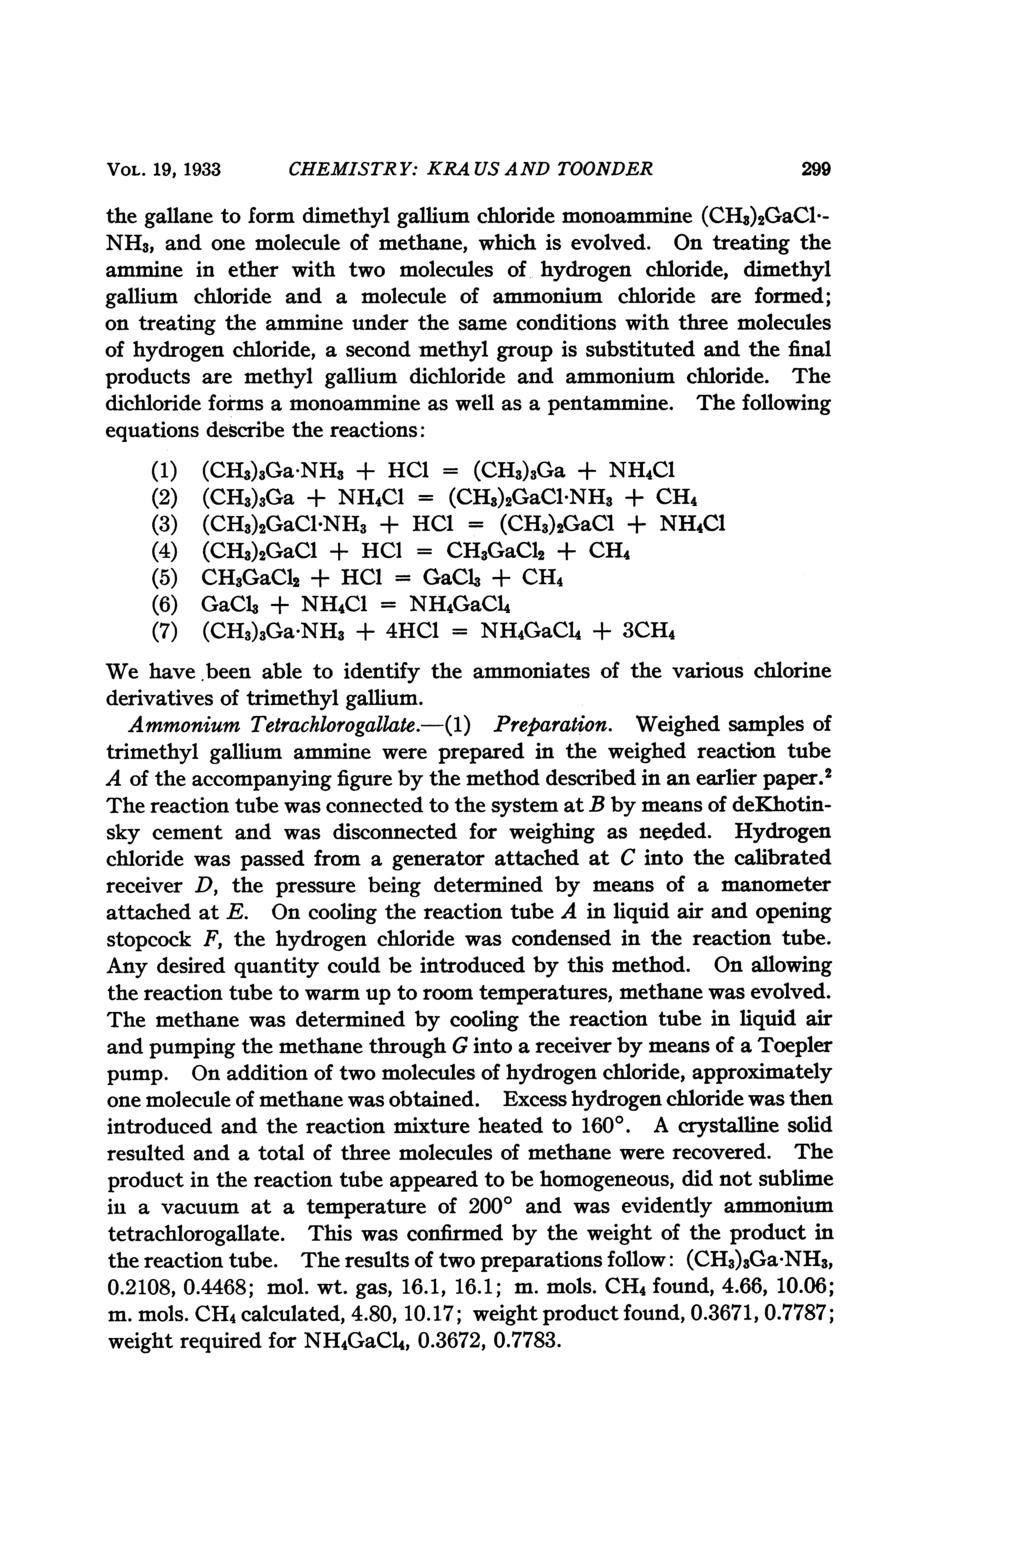 VOL. VOL.19,193 1933 CHEMISTR Y: KRA US AND TOONDER 299 the gallane to form dimethyl gallium chloride monoammine (CHs)2GaCl- NH3, and one molecule of methane, which is evolved.